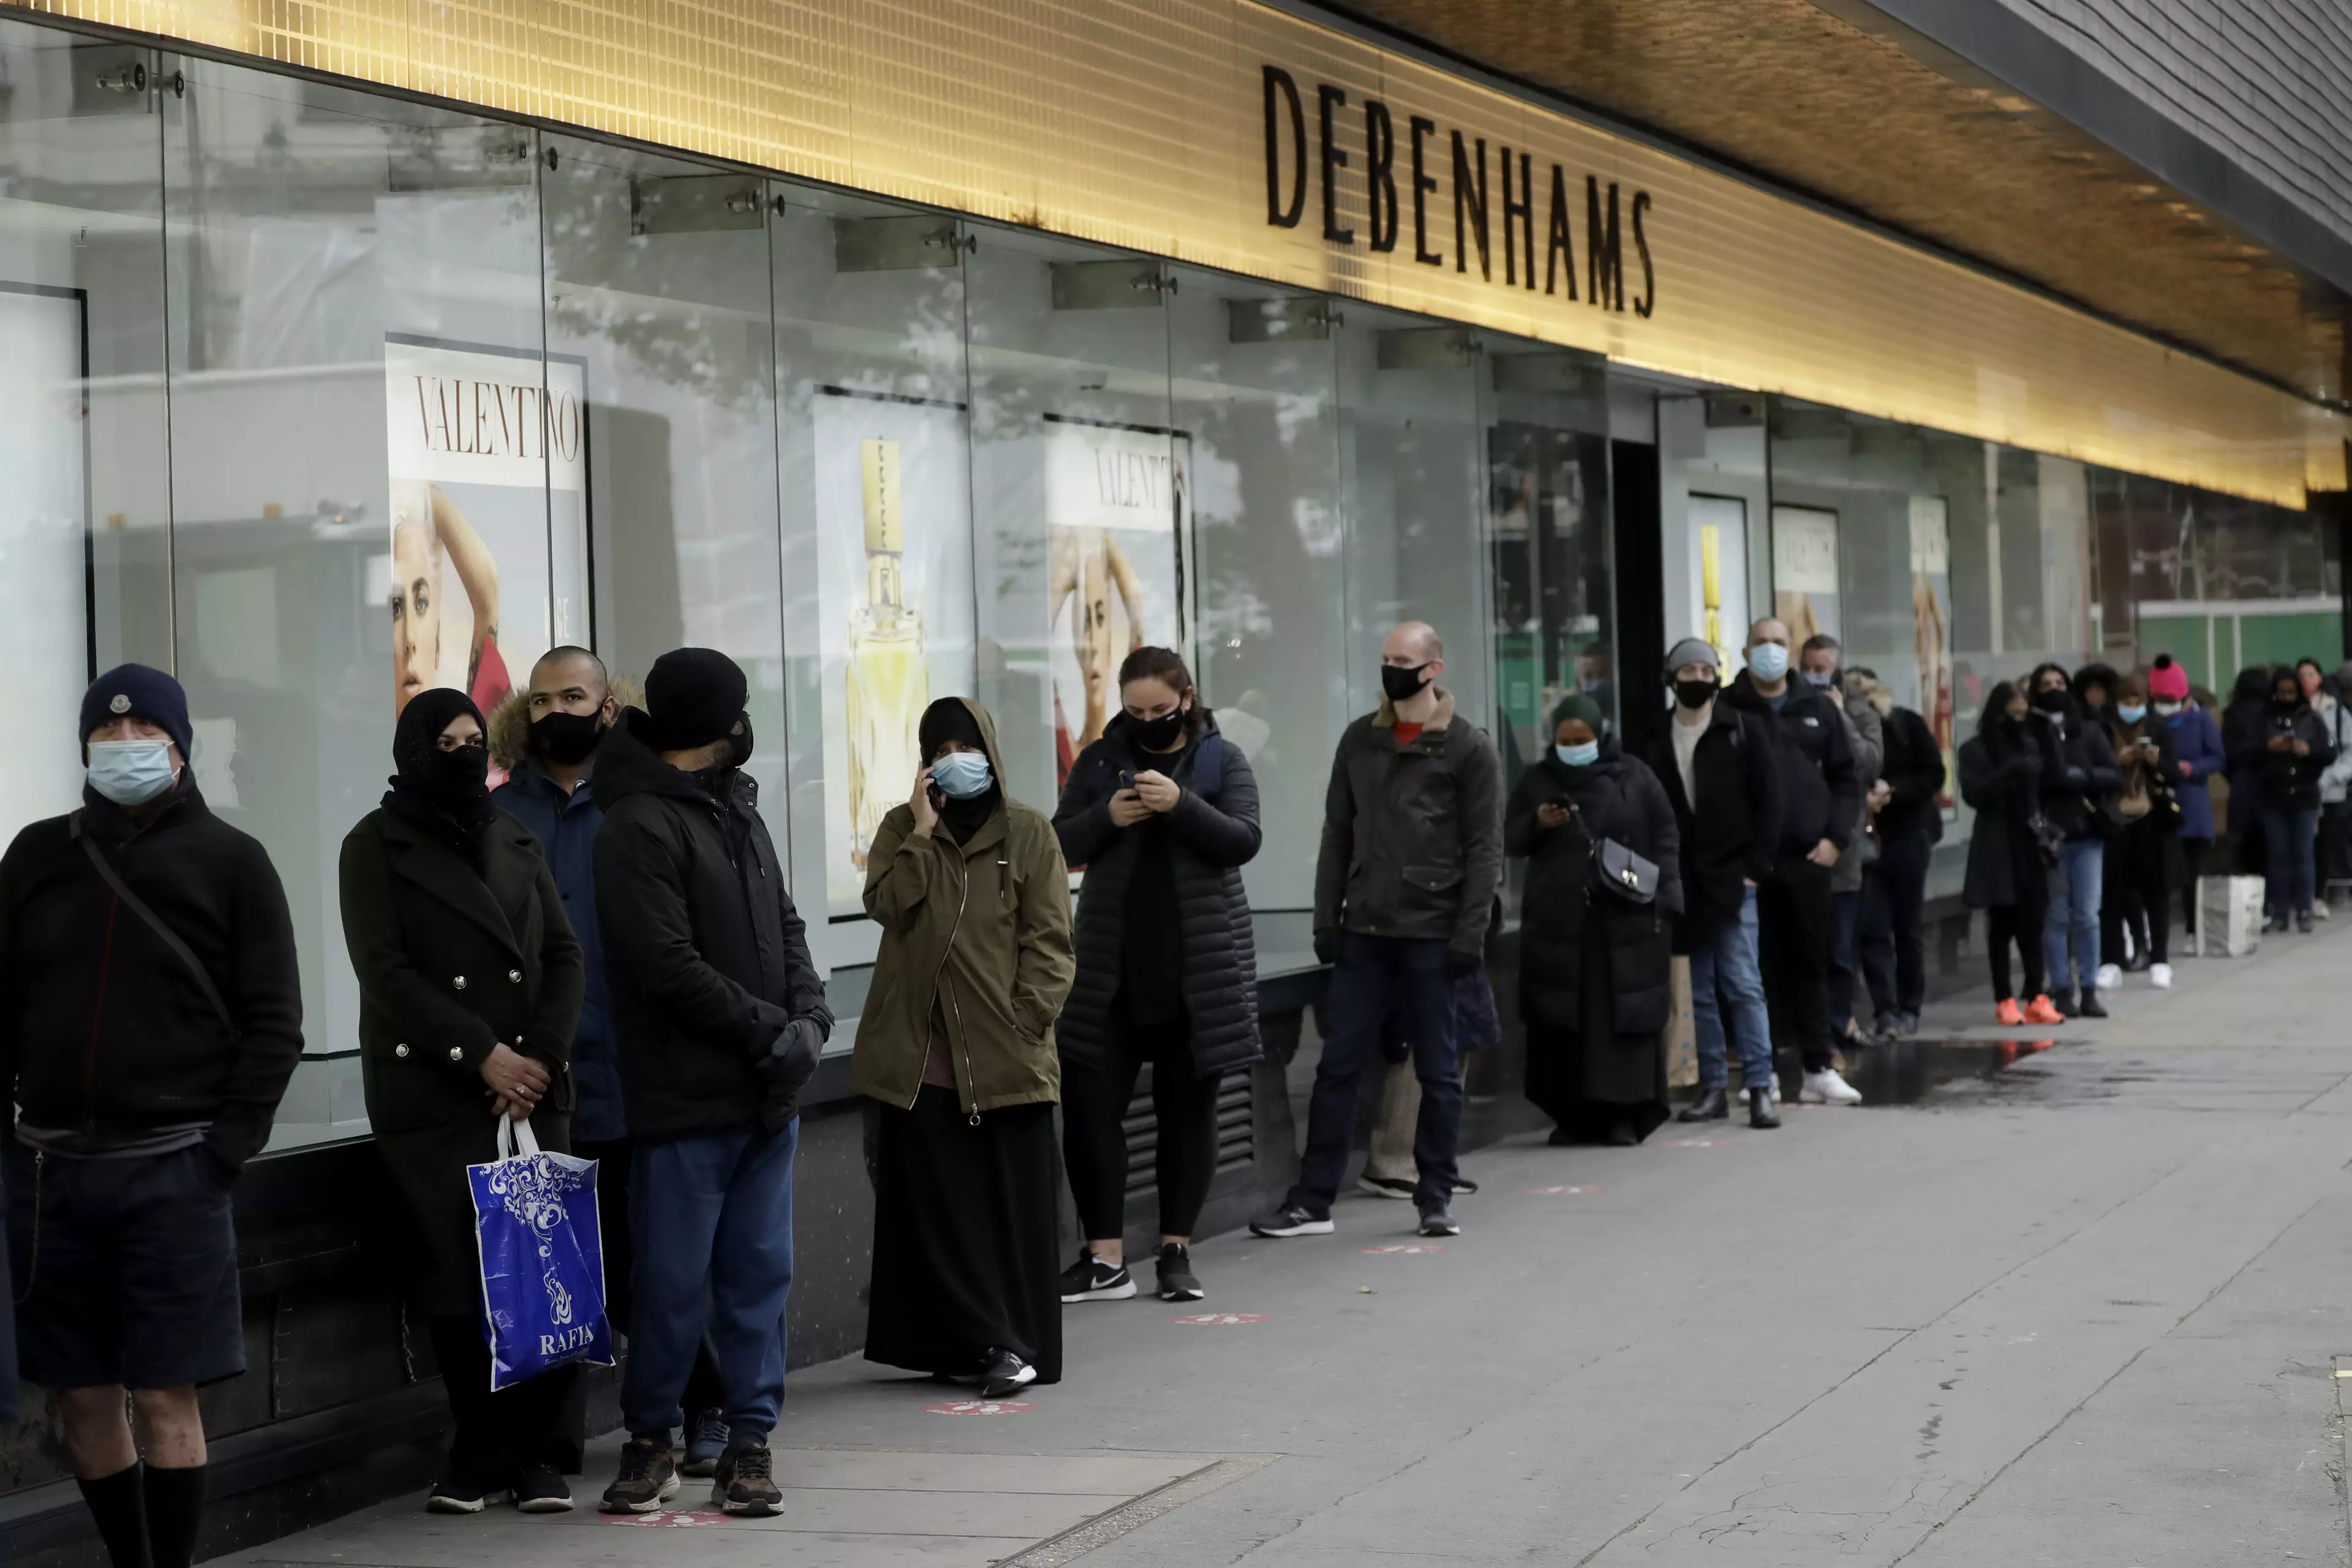 Shoppers flocked to Debenhams as they try to find deals (